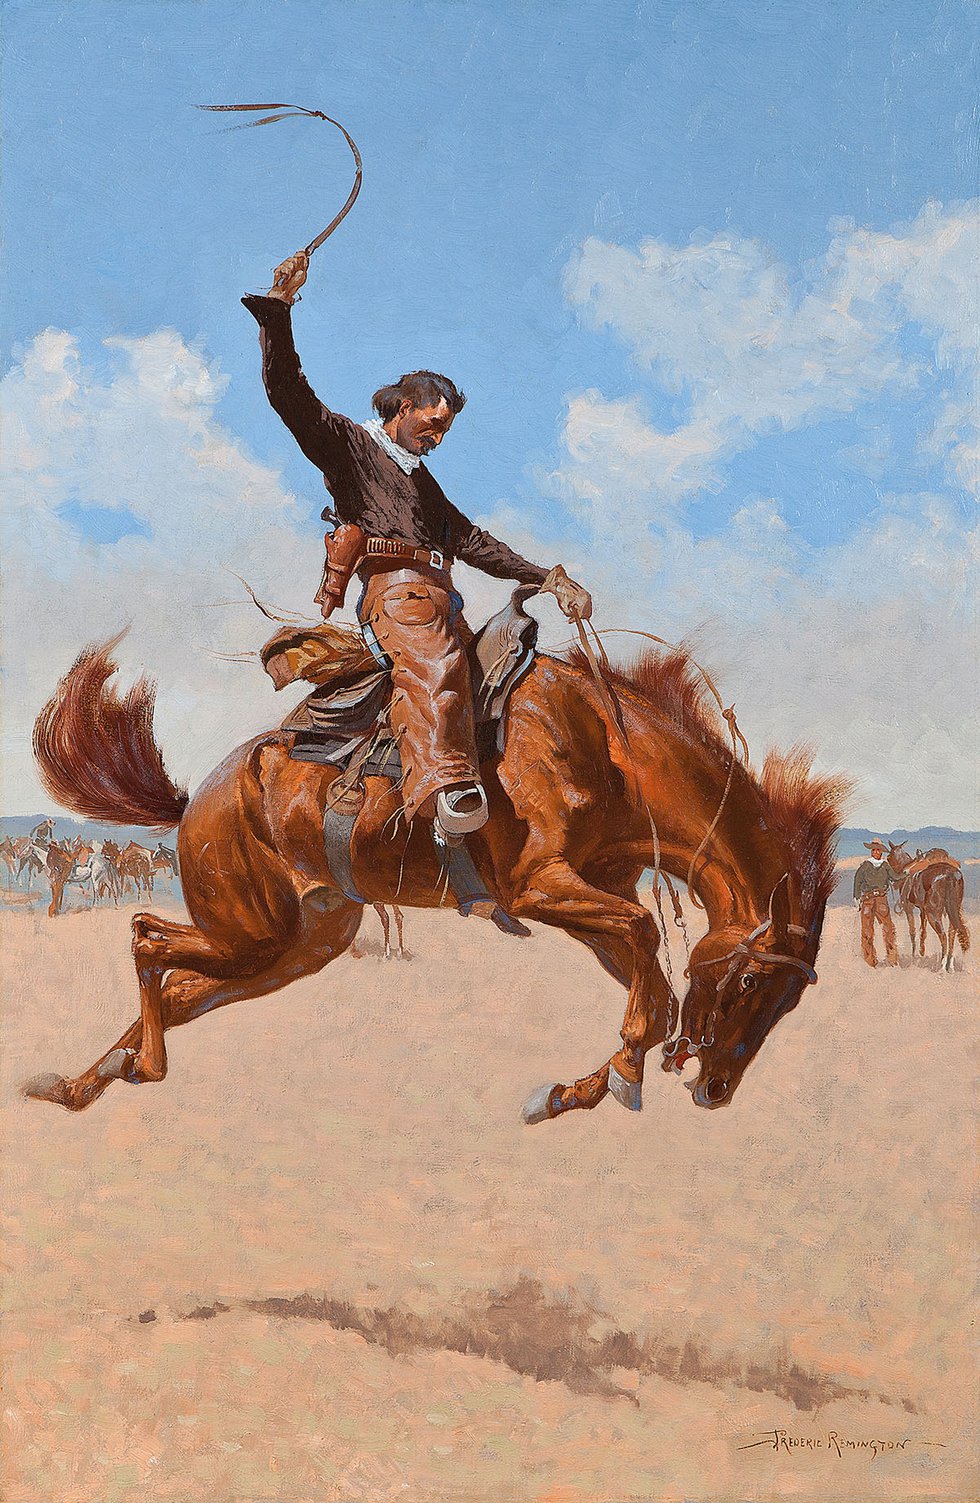 Frederic Remington, "A Buck-Jumper," about 1893